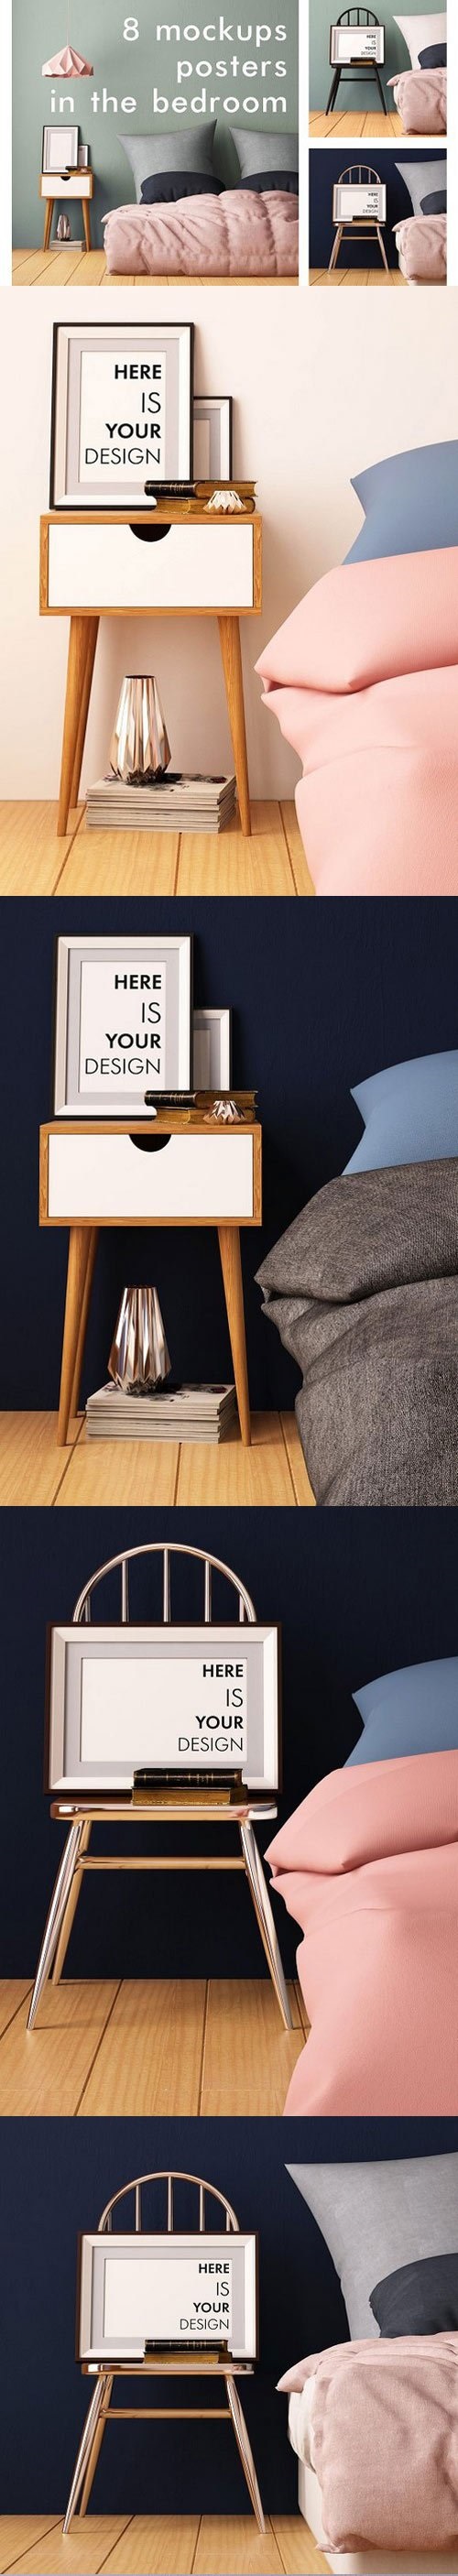 8 mockups posters in the bedroom 1561525